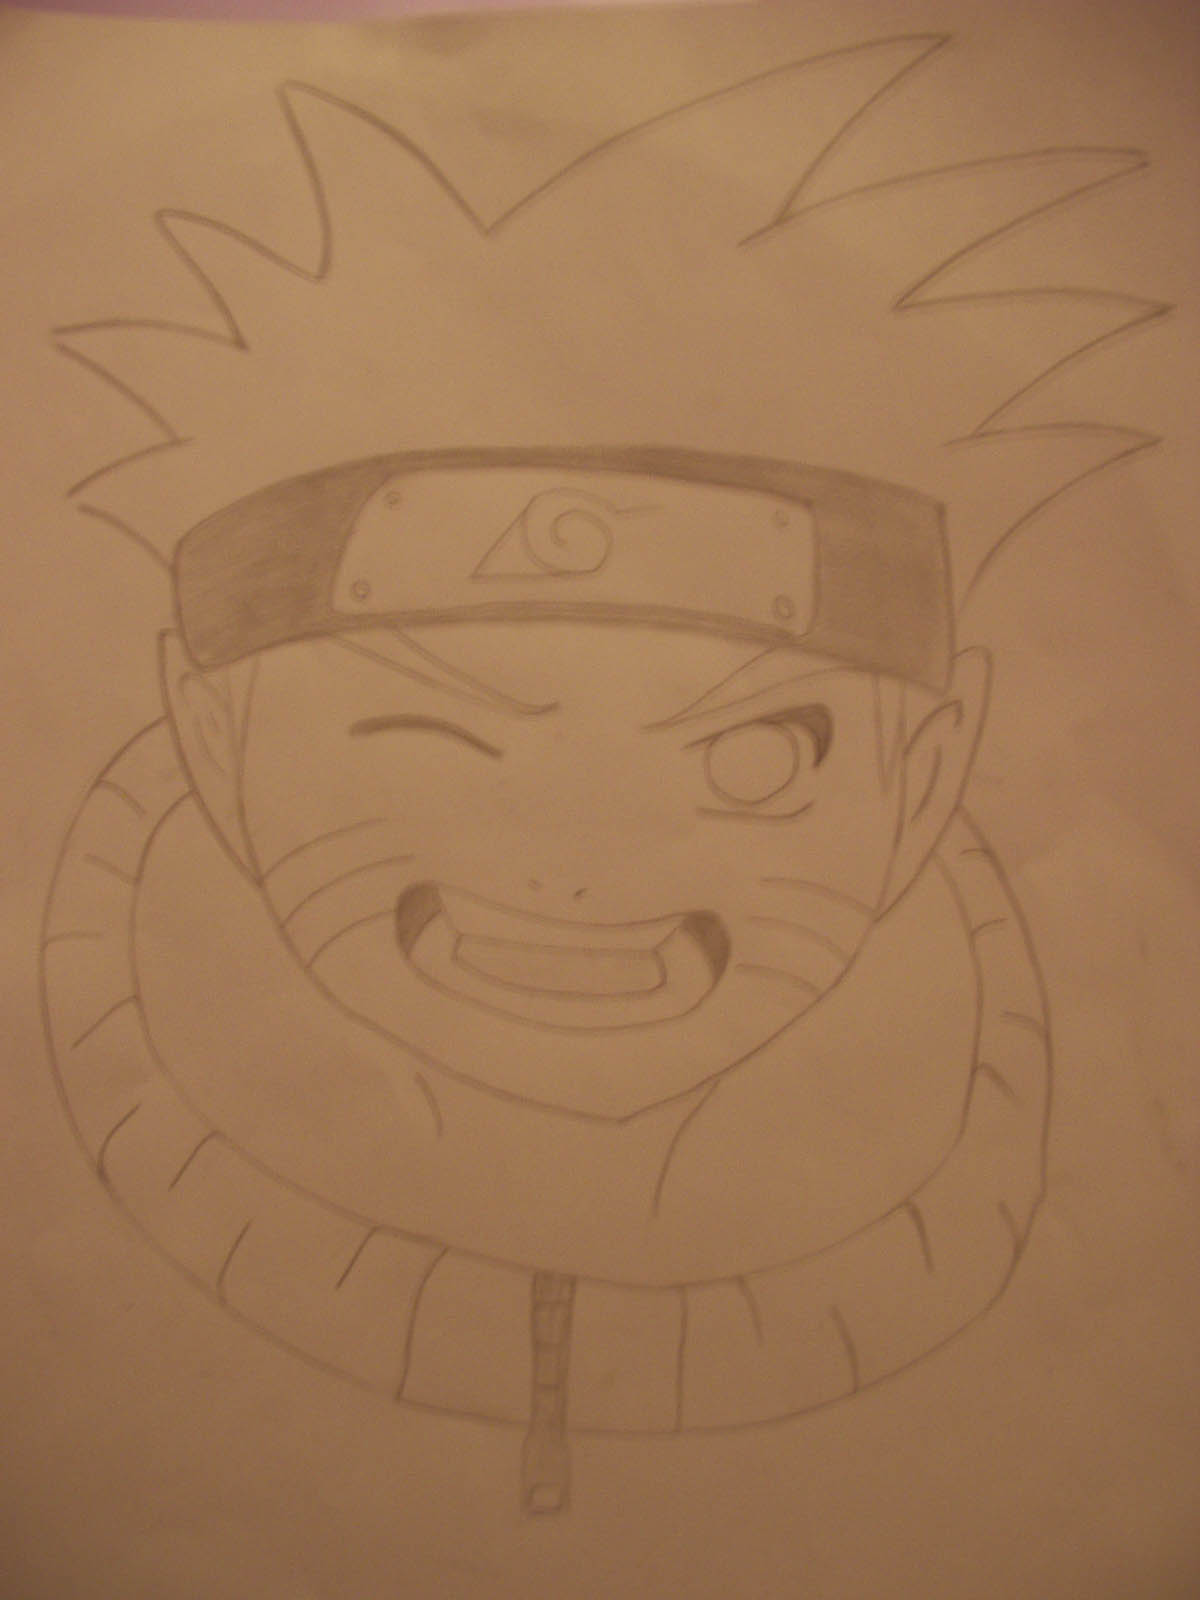 My First Attempt At Naruto by GothicfarieluvinJack